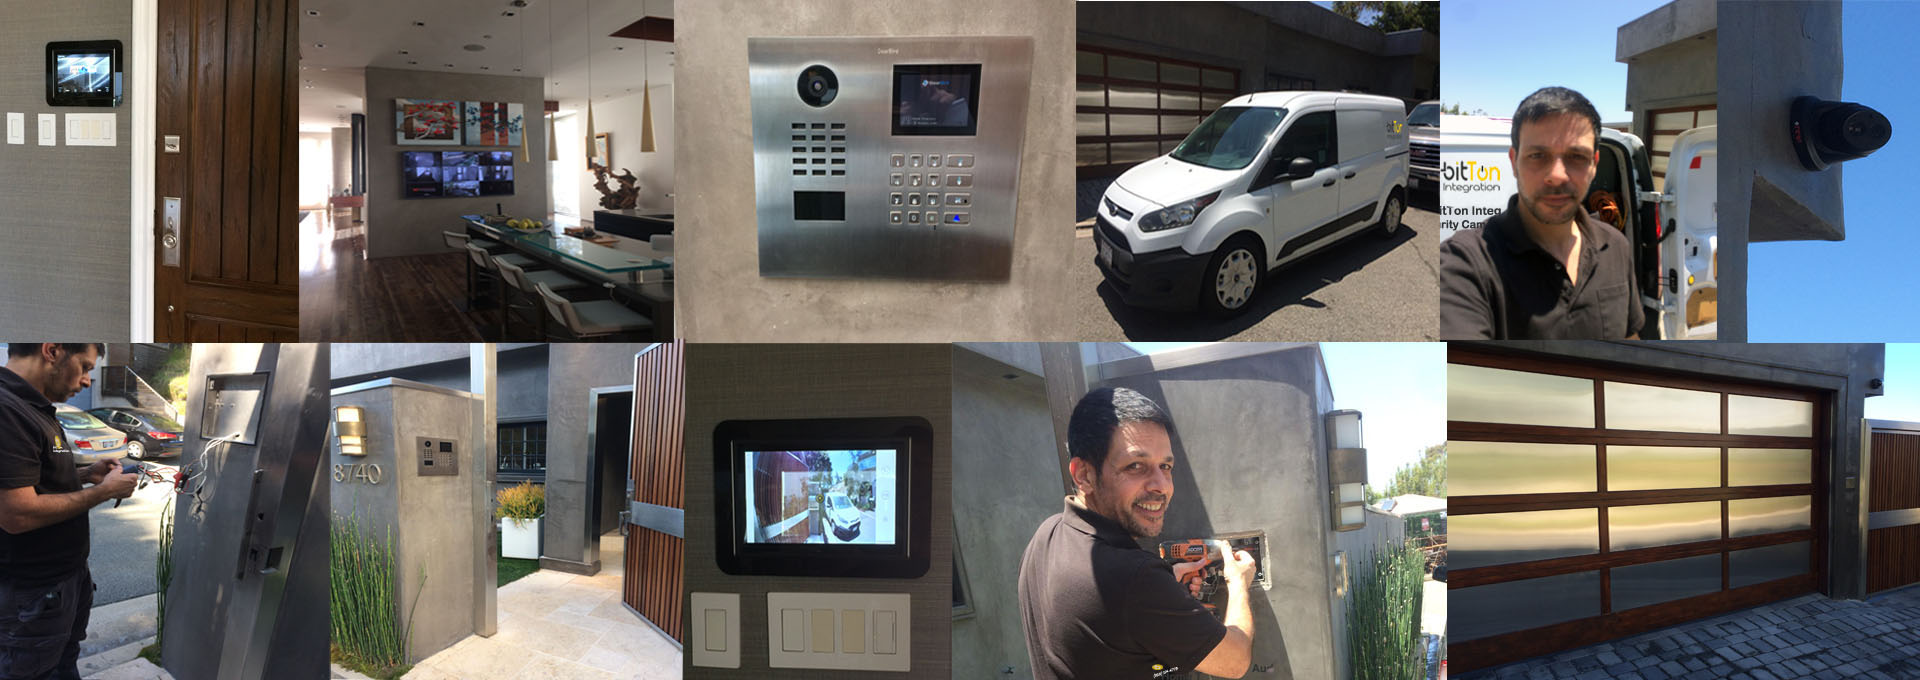 security-cameras-installation-brentwood